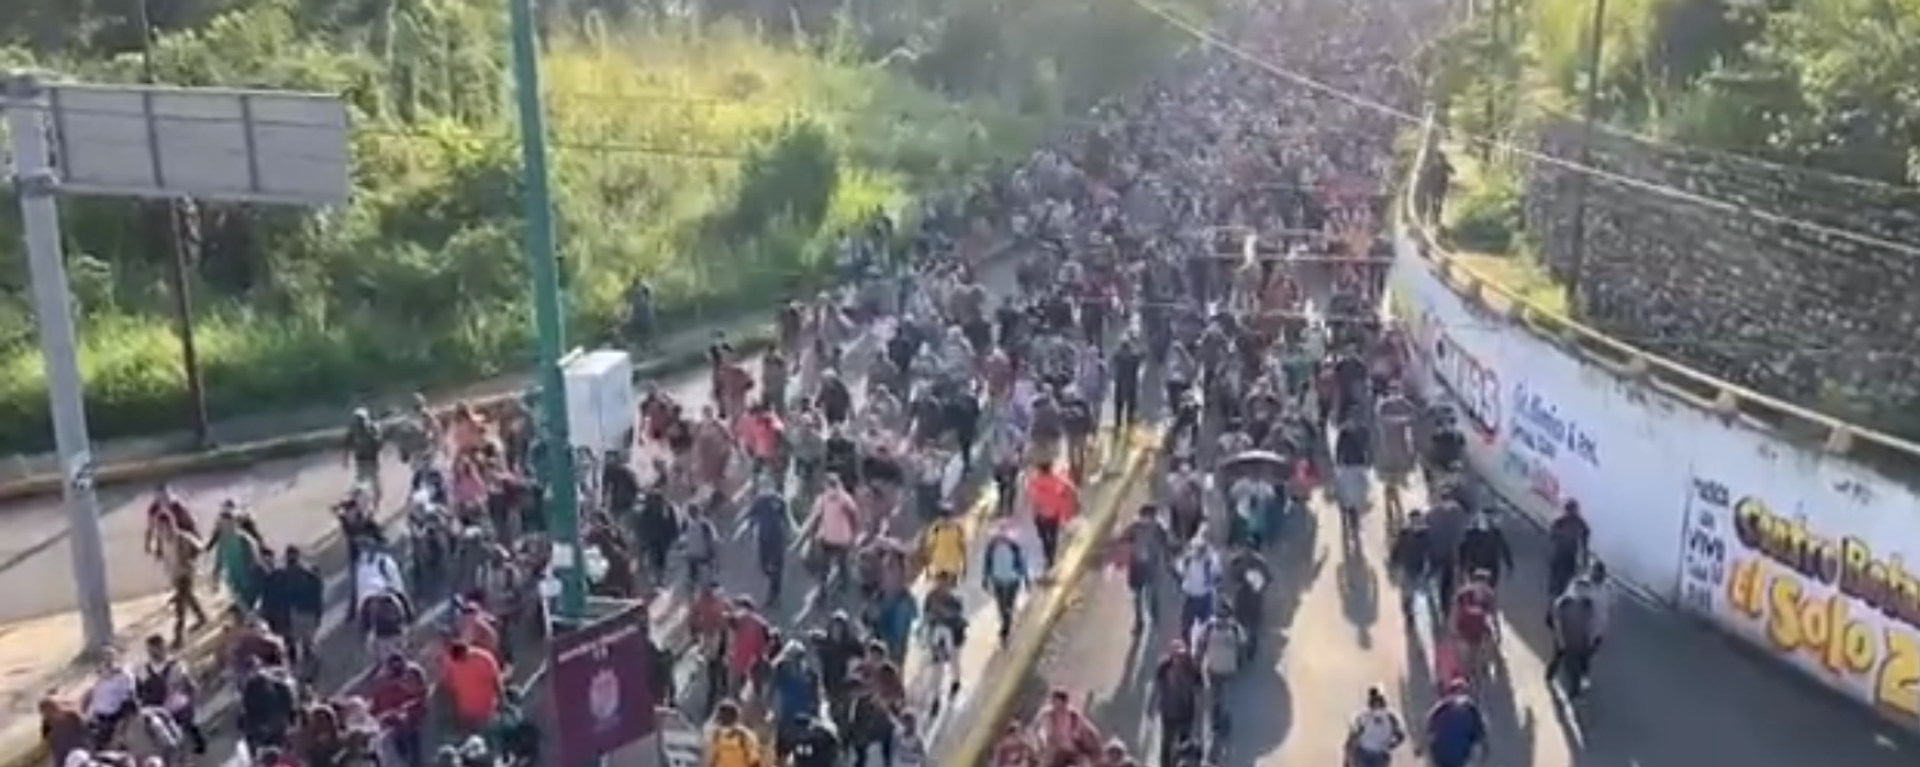 Screengrab of video of migrant caravan traveling through southern Mexico after leaving Tapachula, Mexico on route to country's capital. - Sputnik International, 1920, 23.10.2021